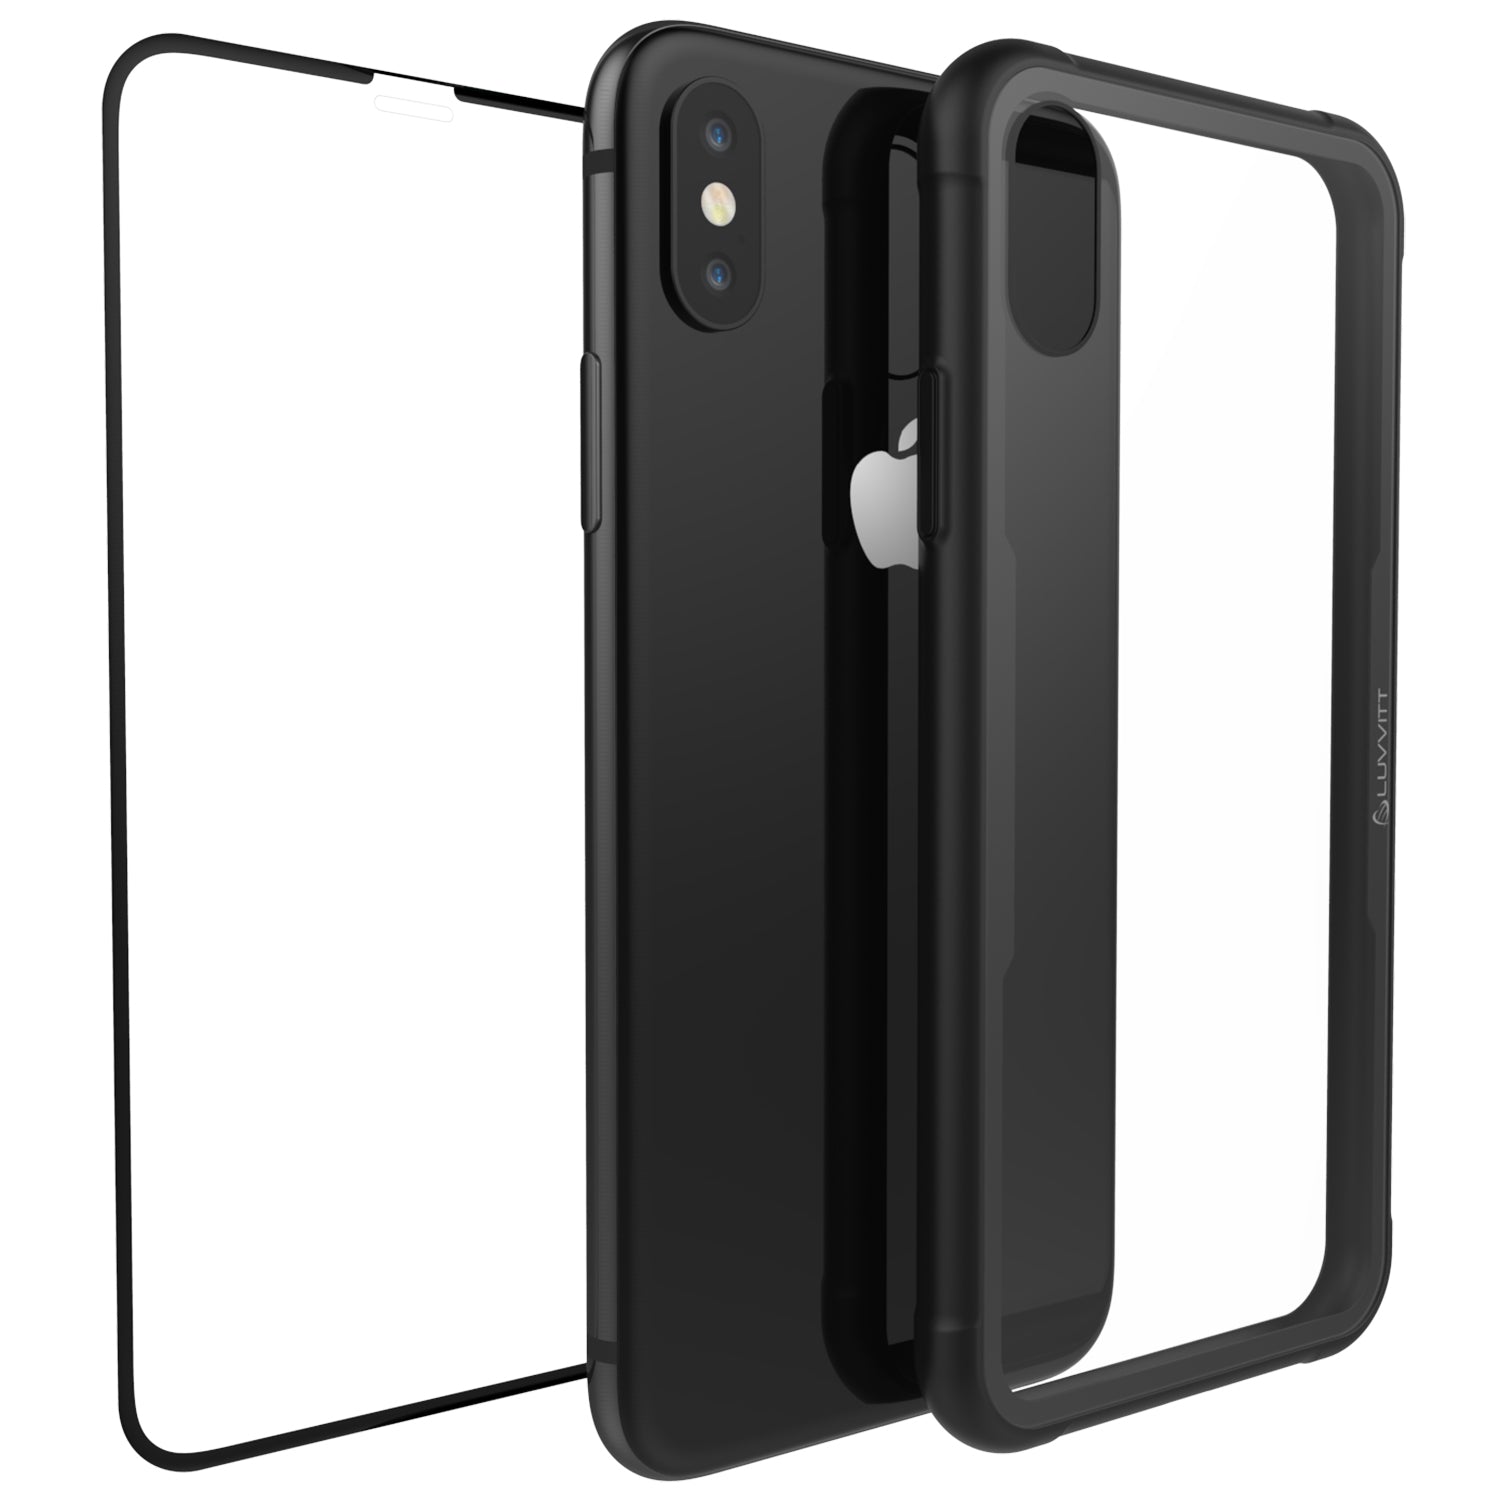 Clearview Case and Tempered Glass Screen Protector for iPhone X / XS - Clear